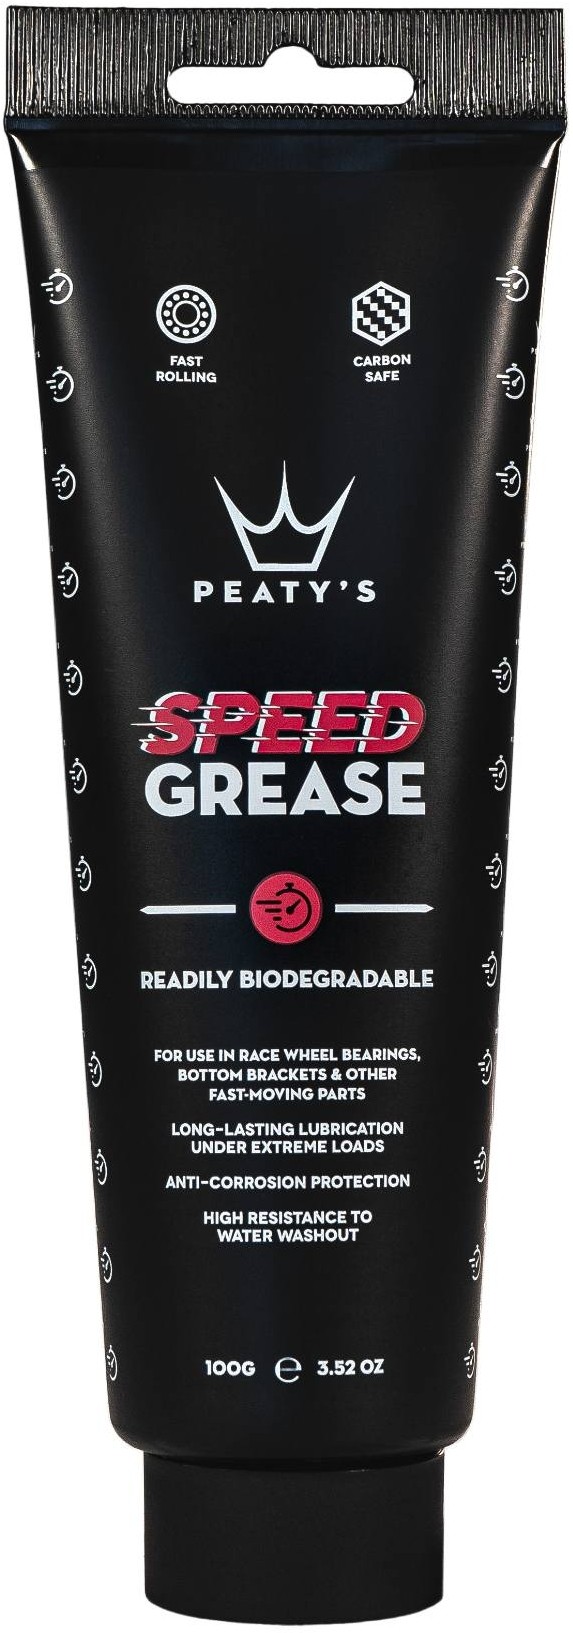 Speed Grease 400g image 0